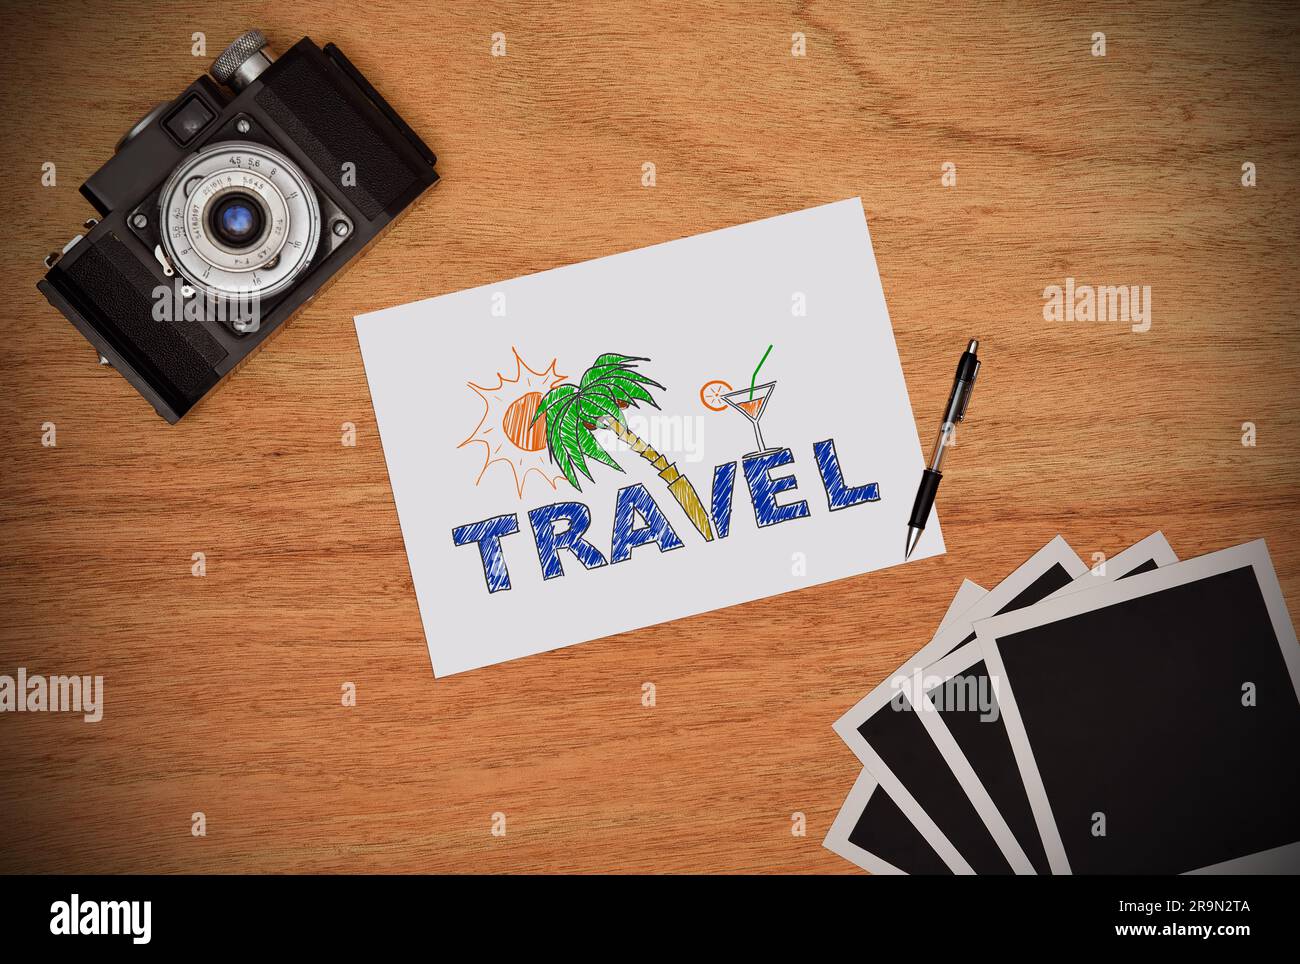 Camera and paper with drawing beach holiday concept. Work desk tourist. Stock Photo